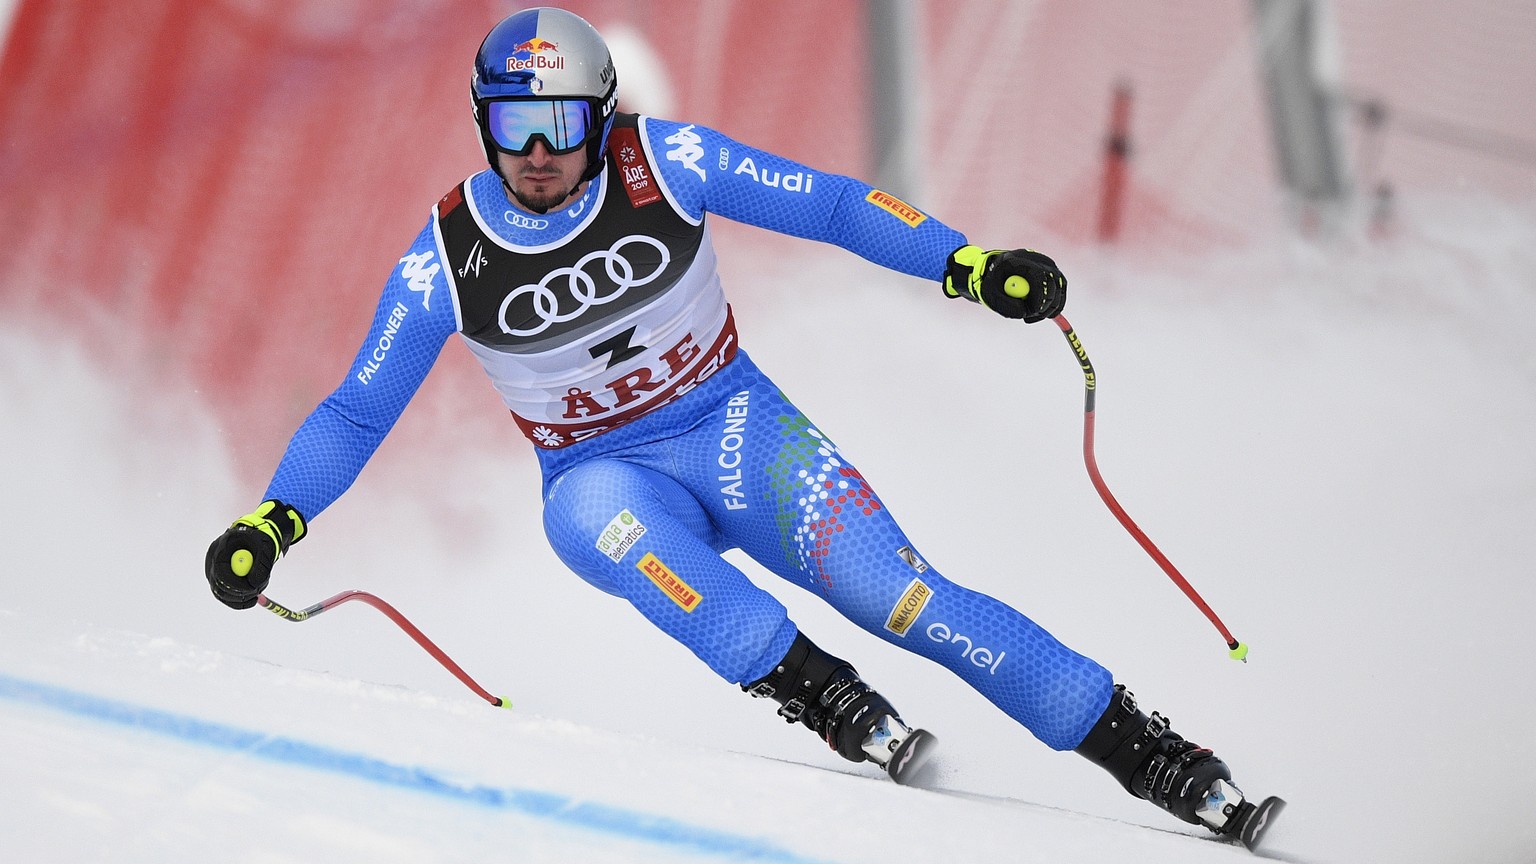 epa07347367 Dominik Paris of Italy in action during the men&#039;s Super G race at the FIS Alpine Skiing World Championships in Are, Sweden, 06 February 2019. EPA/CHRISTIAN BRUNA